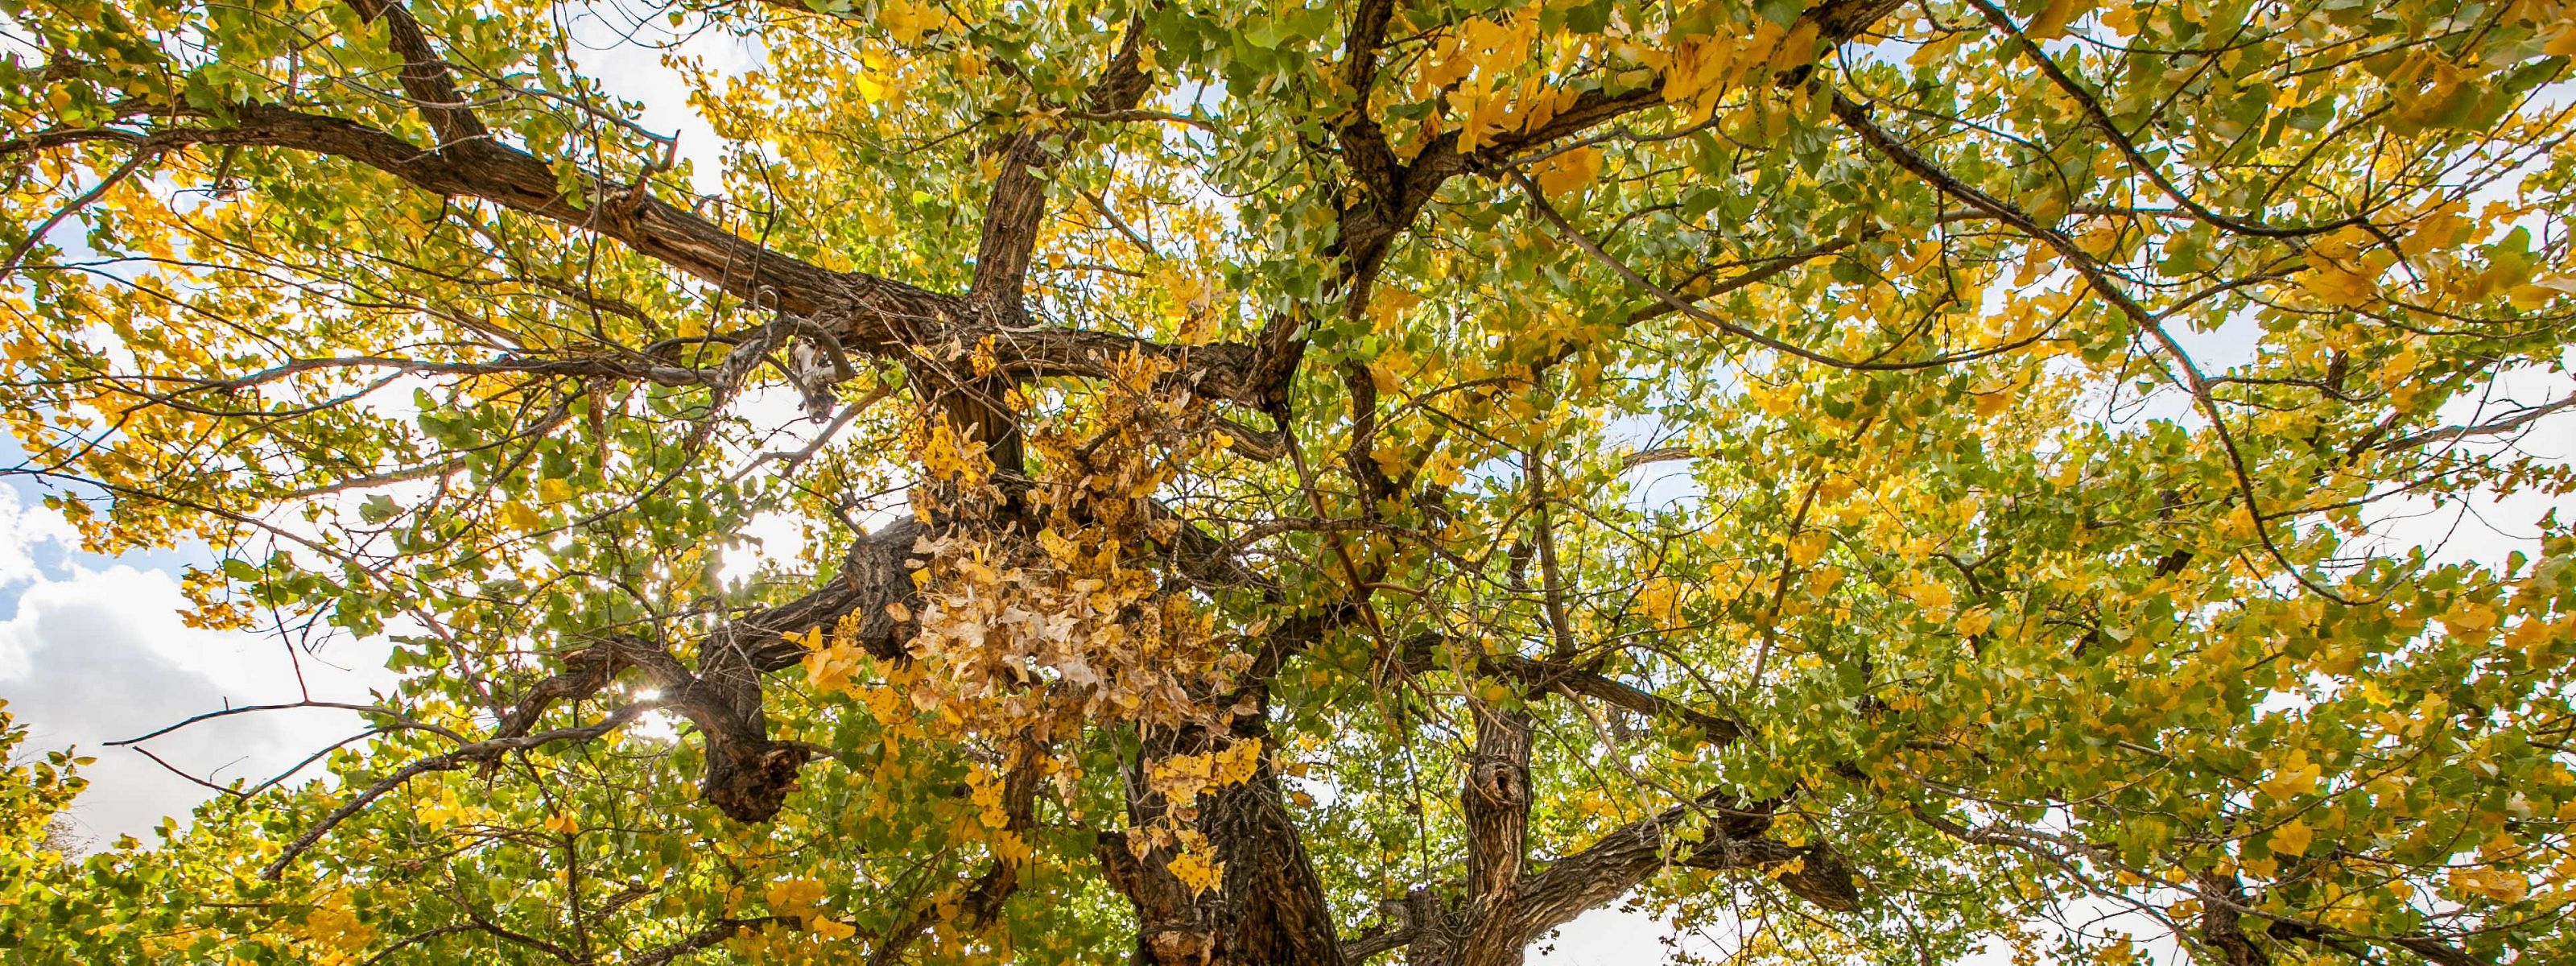 A close-in view of the yellow and green foliage of a mature cottonwood tree.